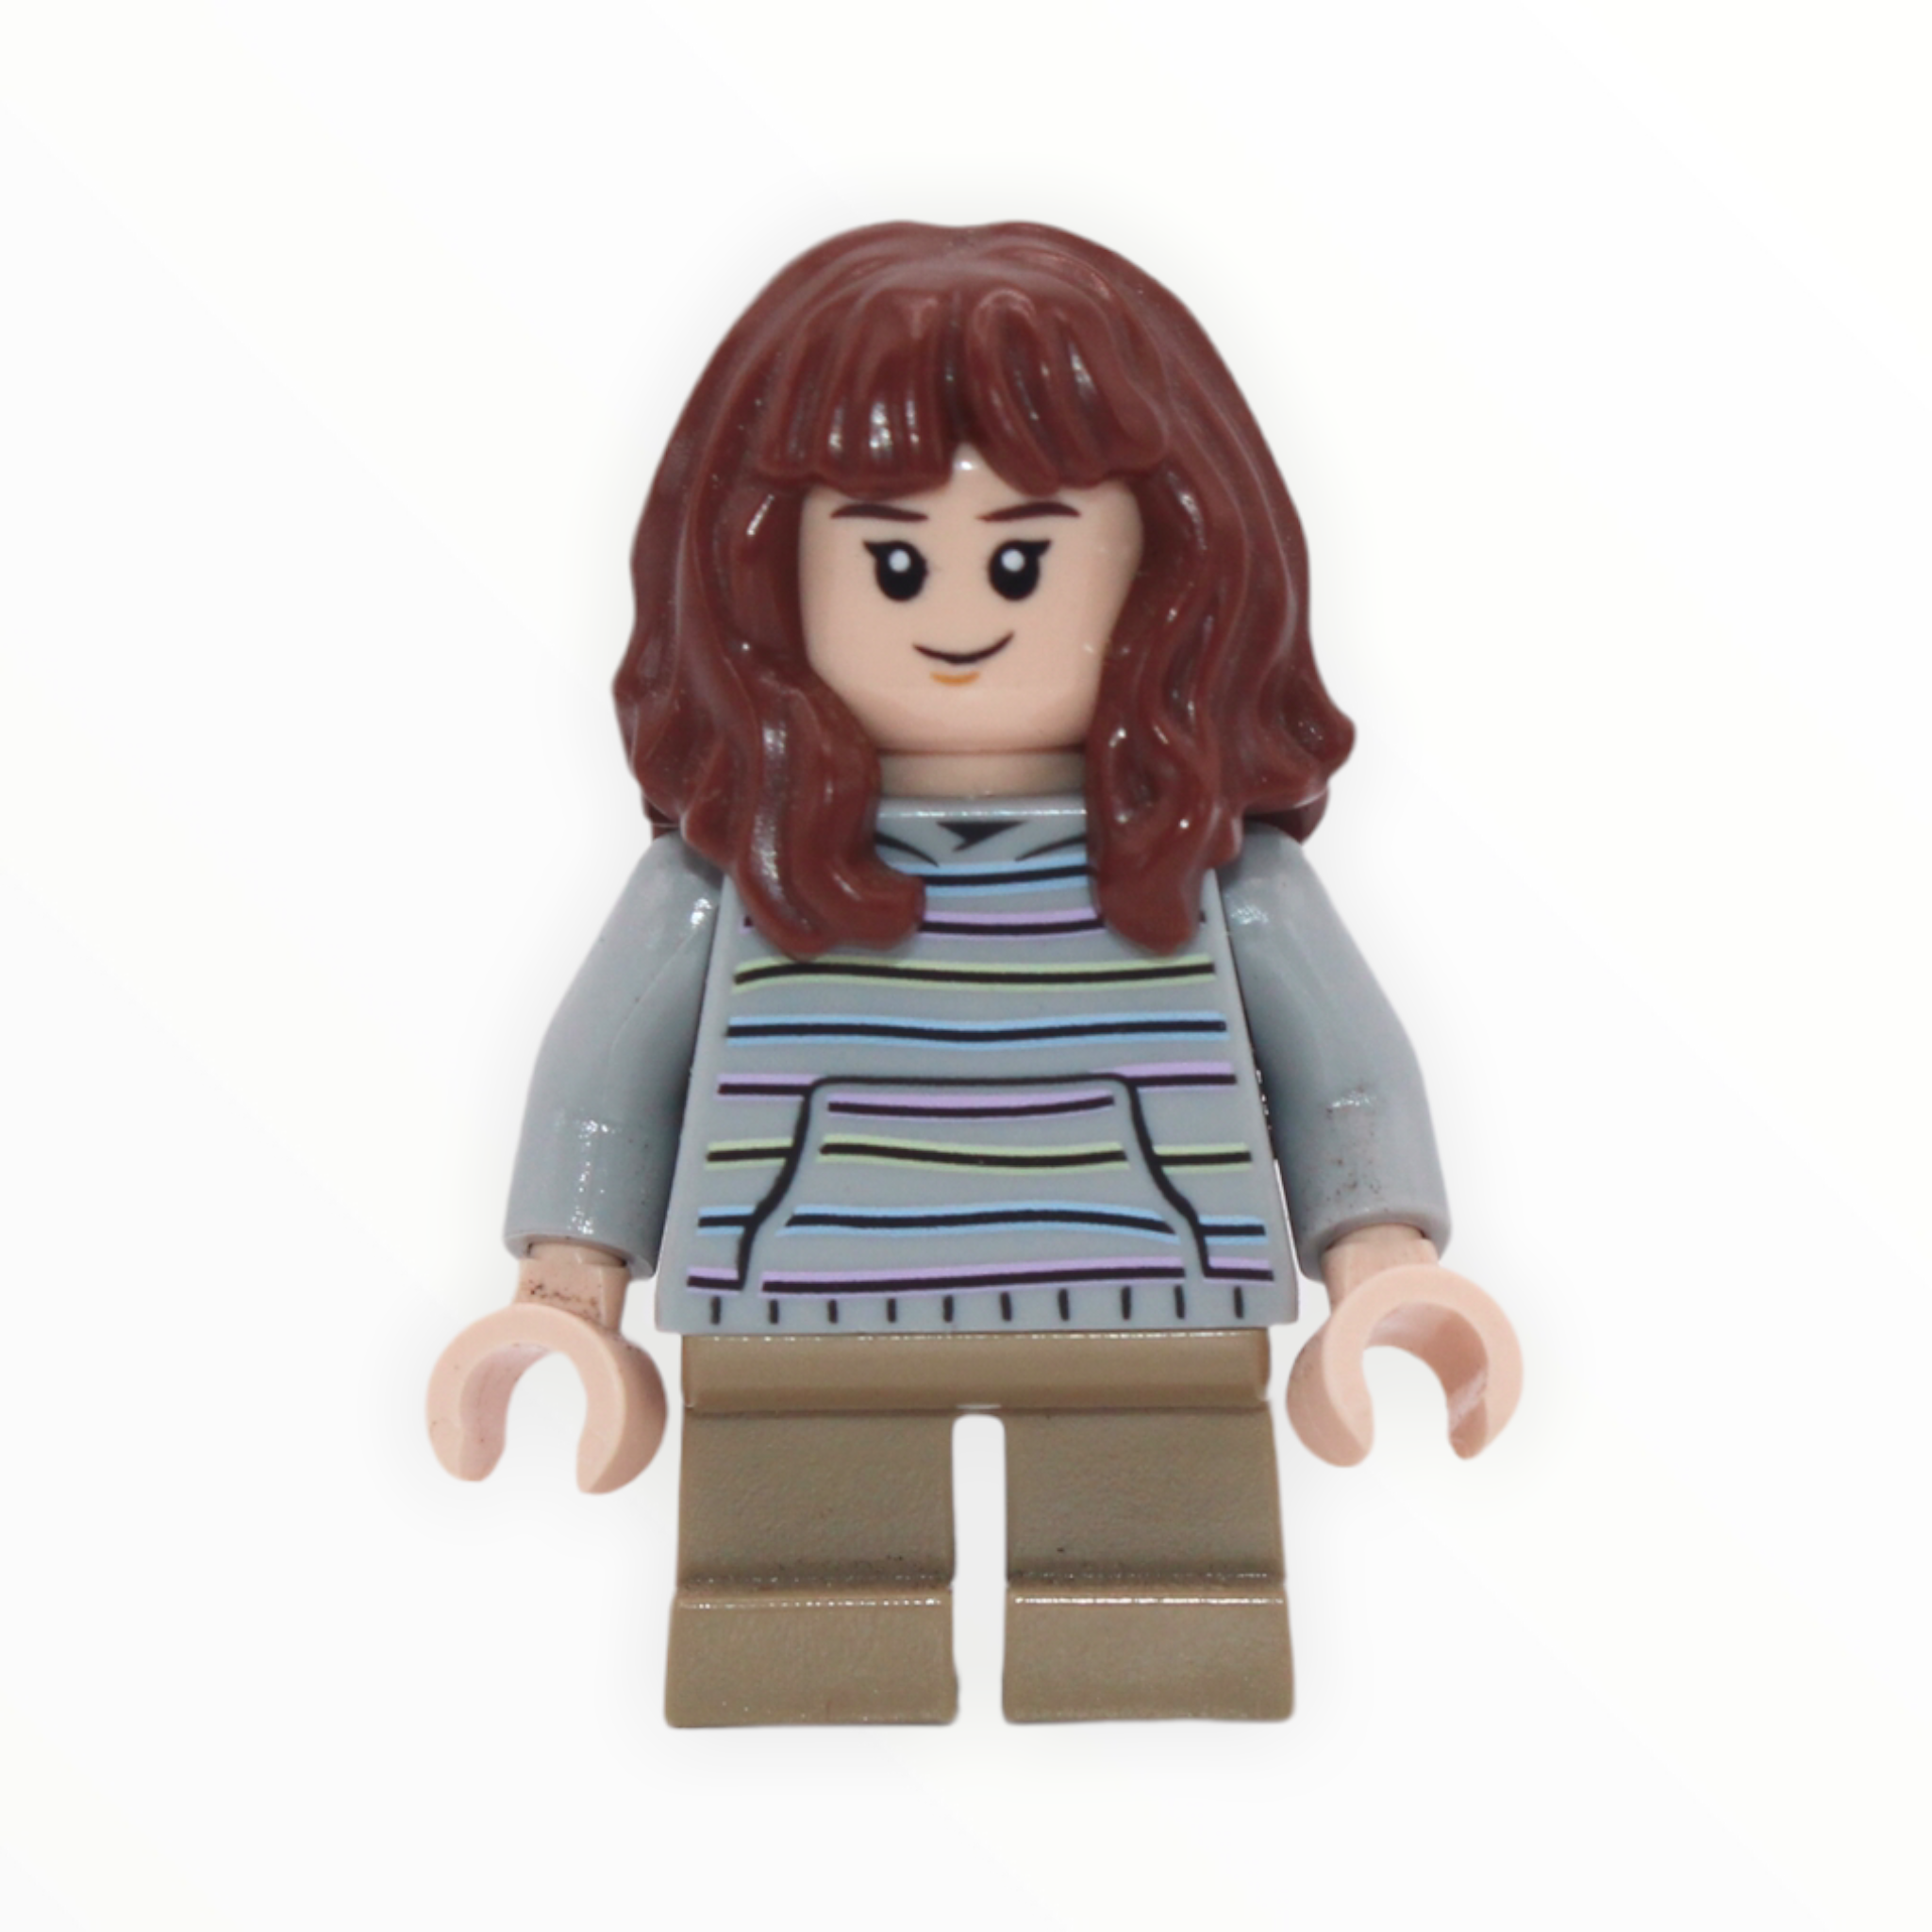 Hermione Granger (sweater with pastel stripes, short legs)